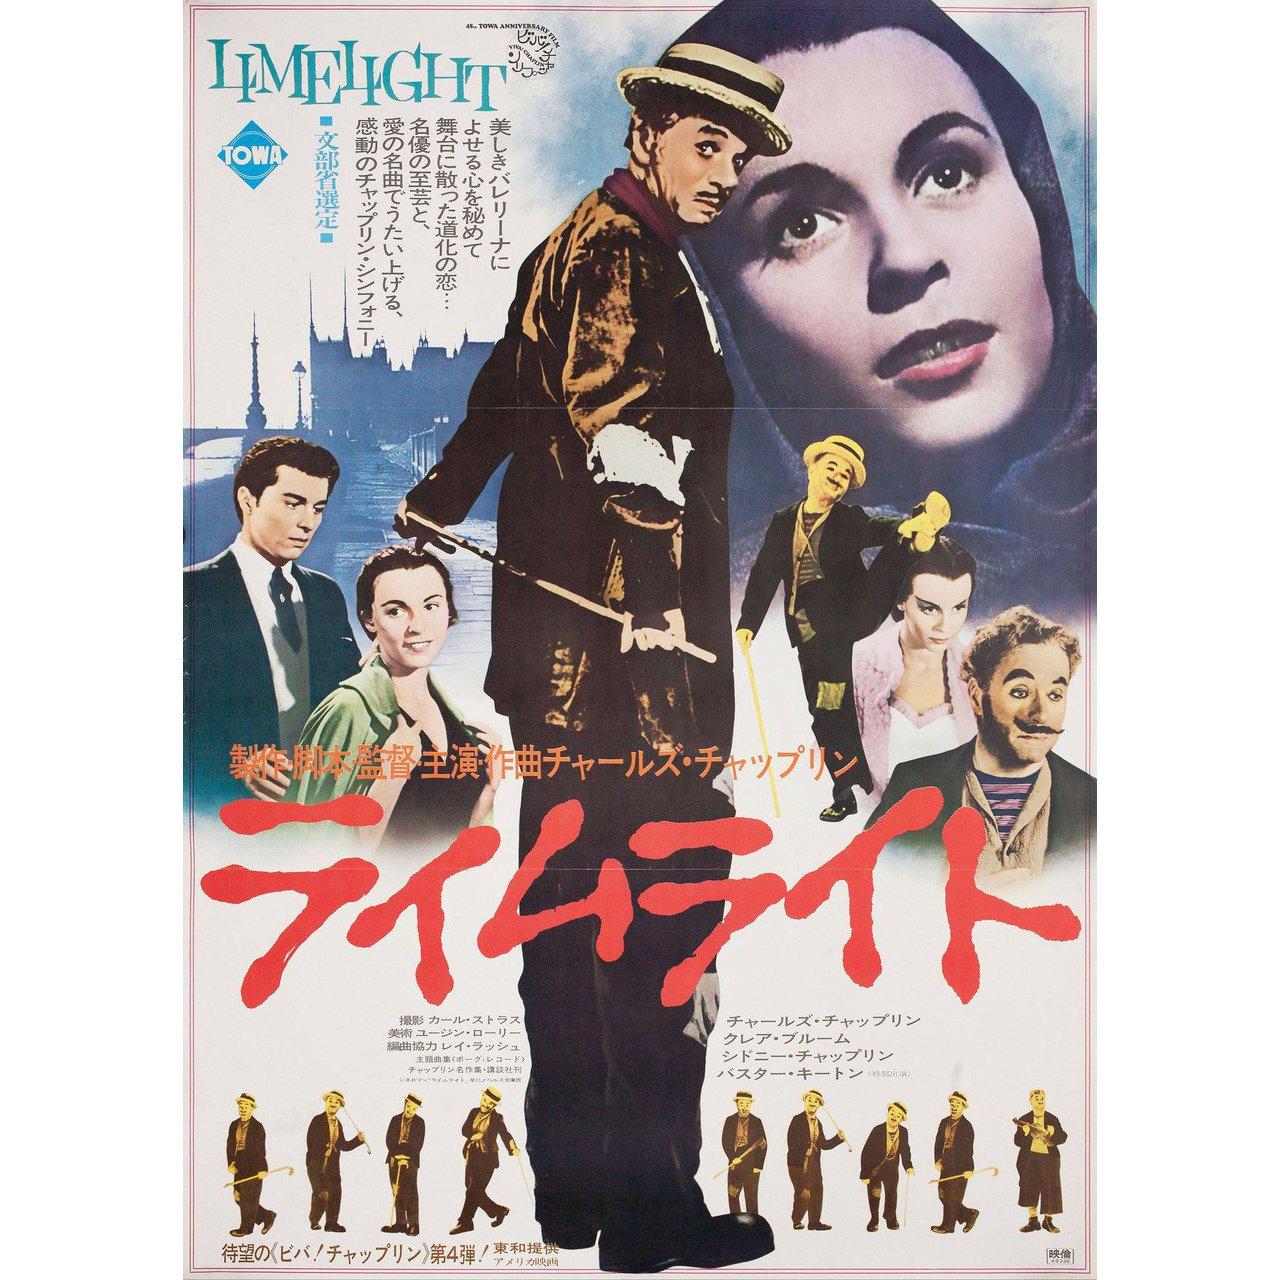 Original 1973 re-release Japanese B2 poster for the 1952 film “Limelight” directed by Charles Chaplin with Charles Chaplin / Claire Bloom / Nigel Bruce / Buster Keaton. Fine condition, rolled. Please note: the size is stated in inches and the actual